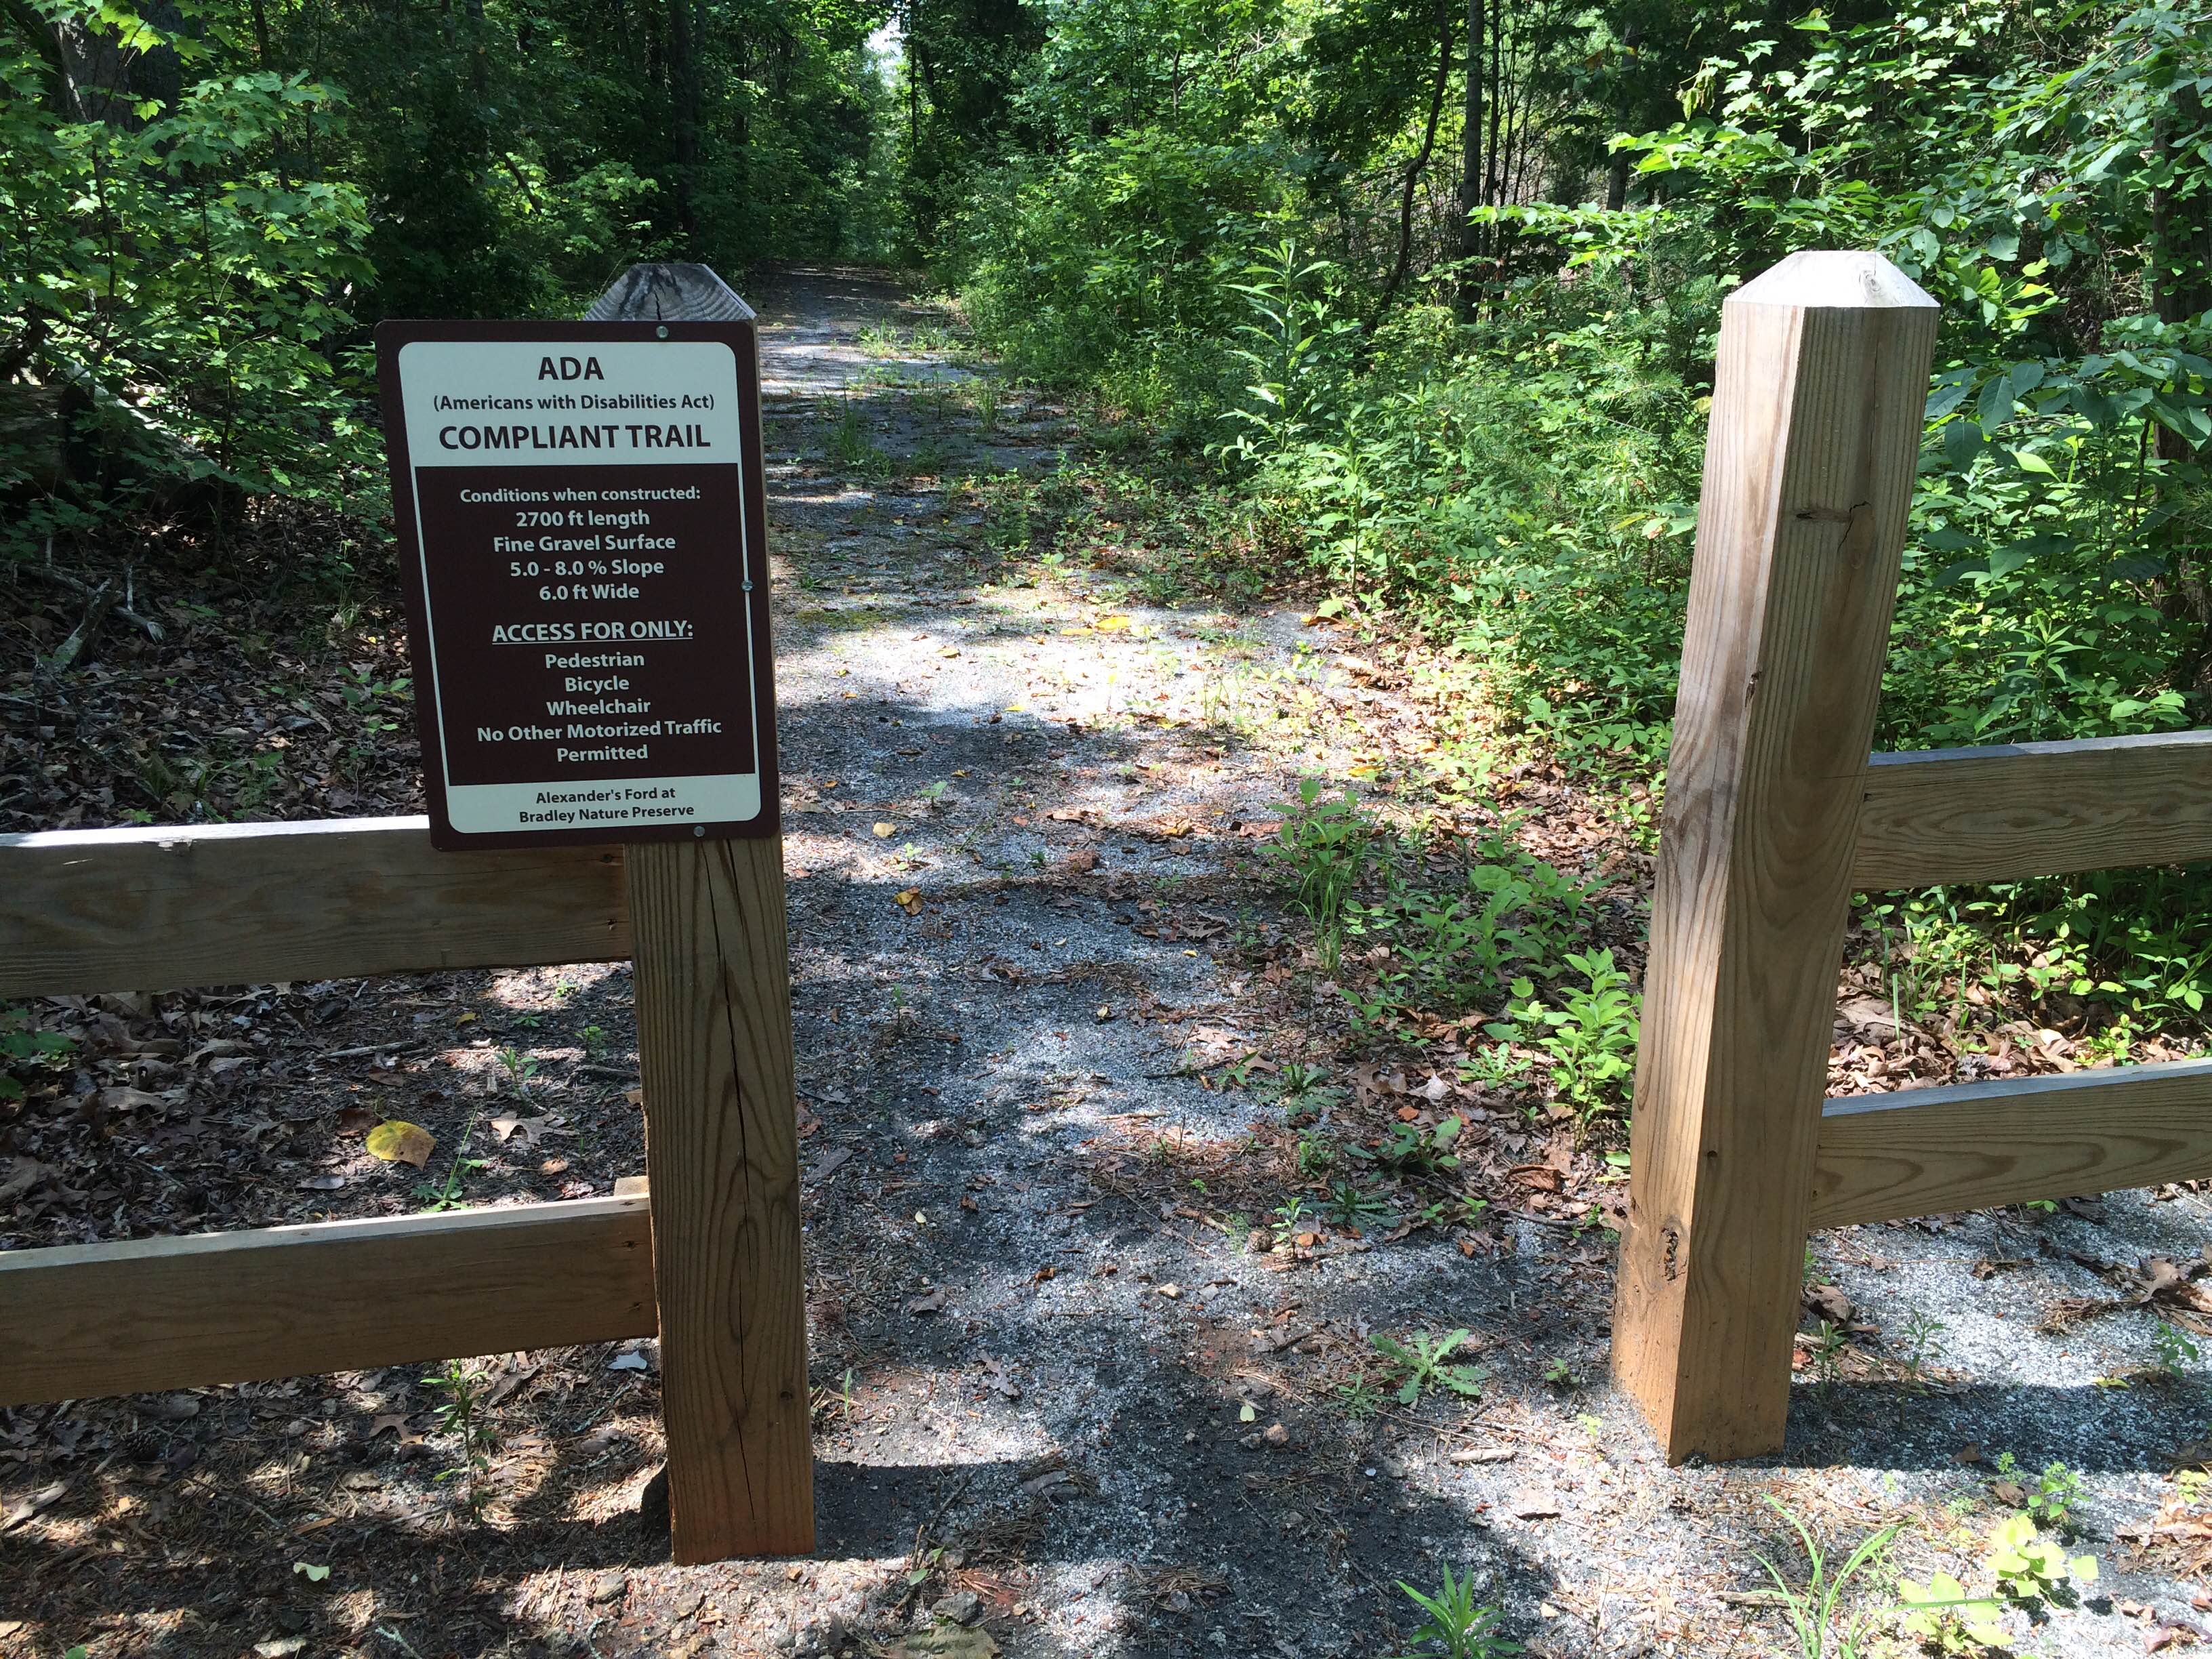 A sign on the trail indicates that this section is compliant with the American with Disabilitie Act.